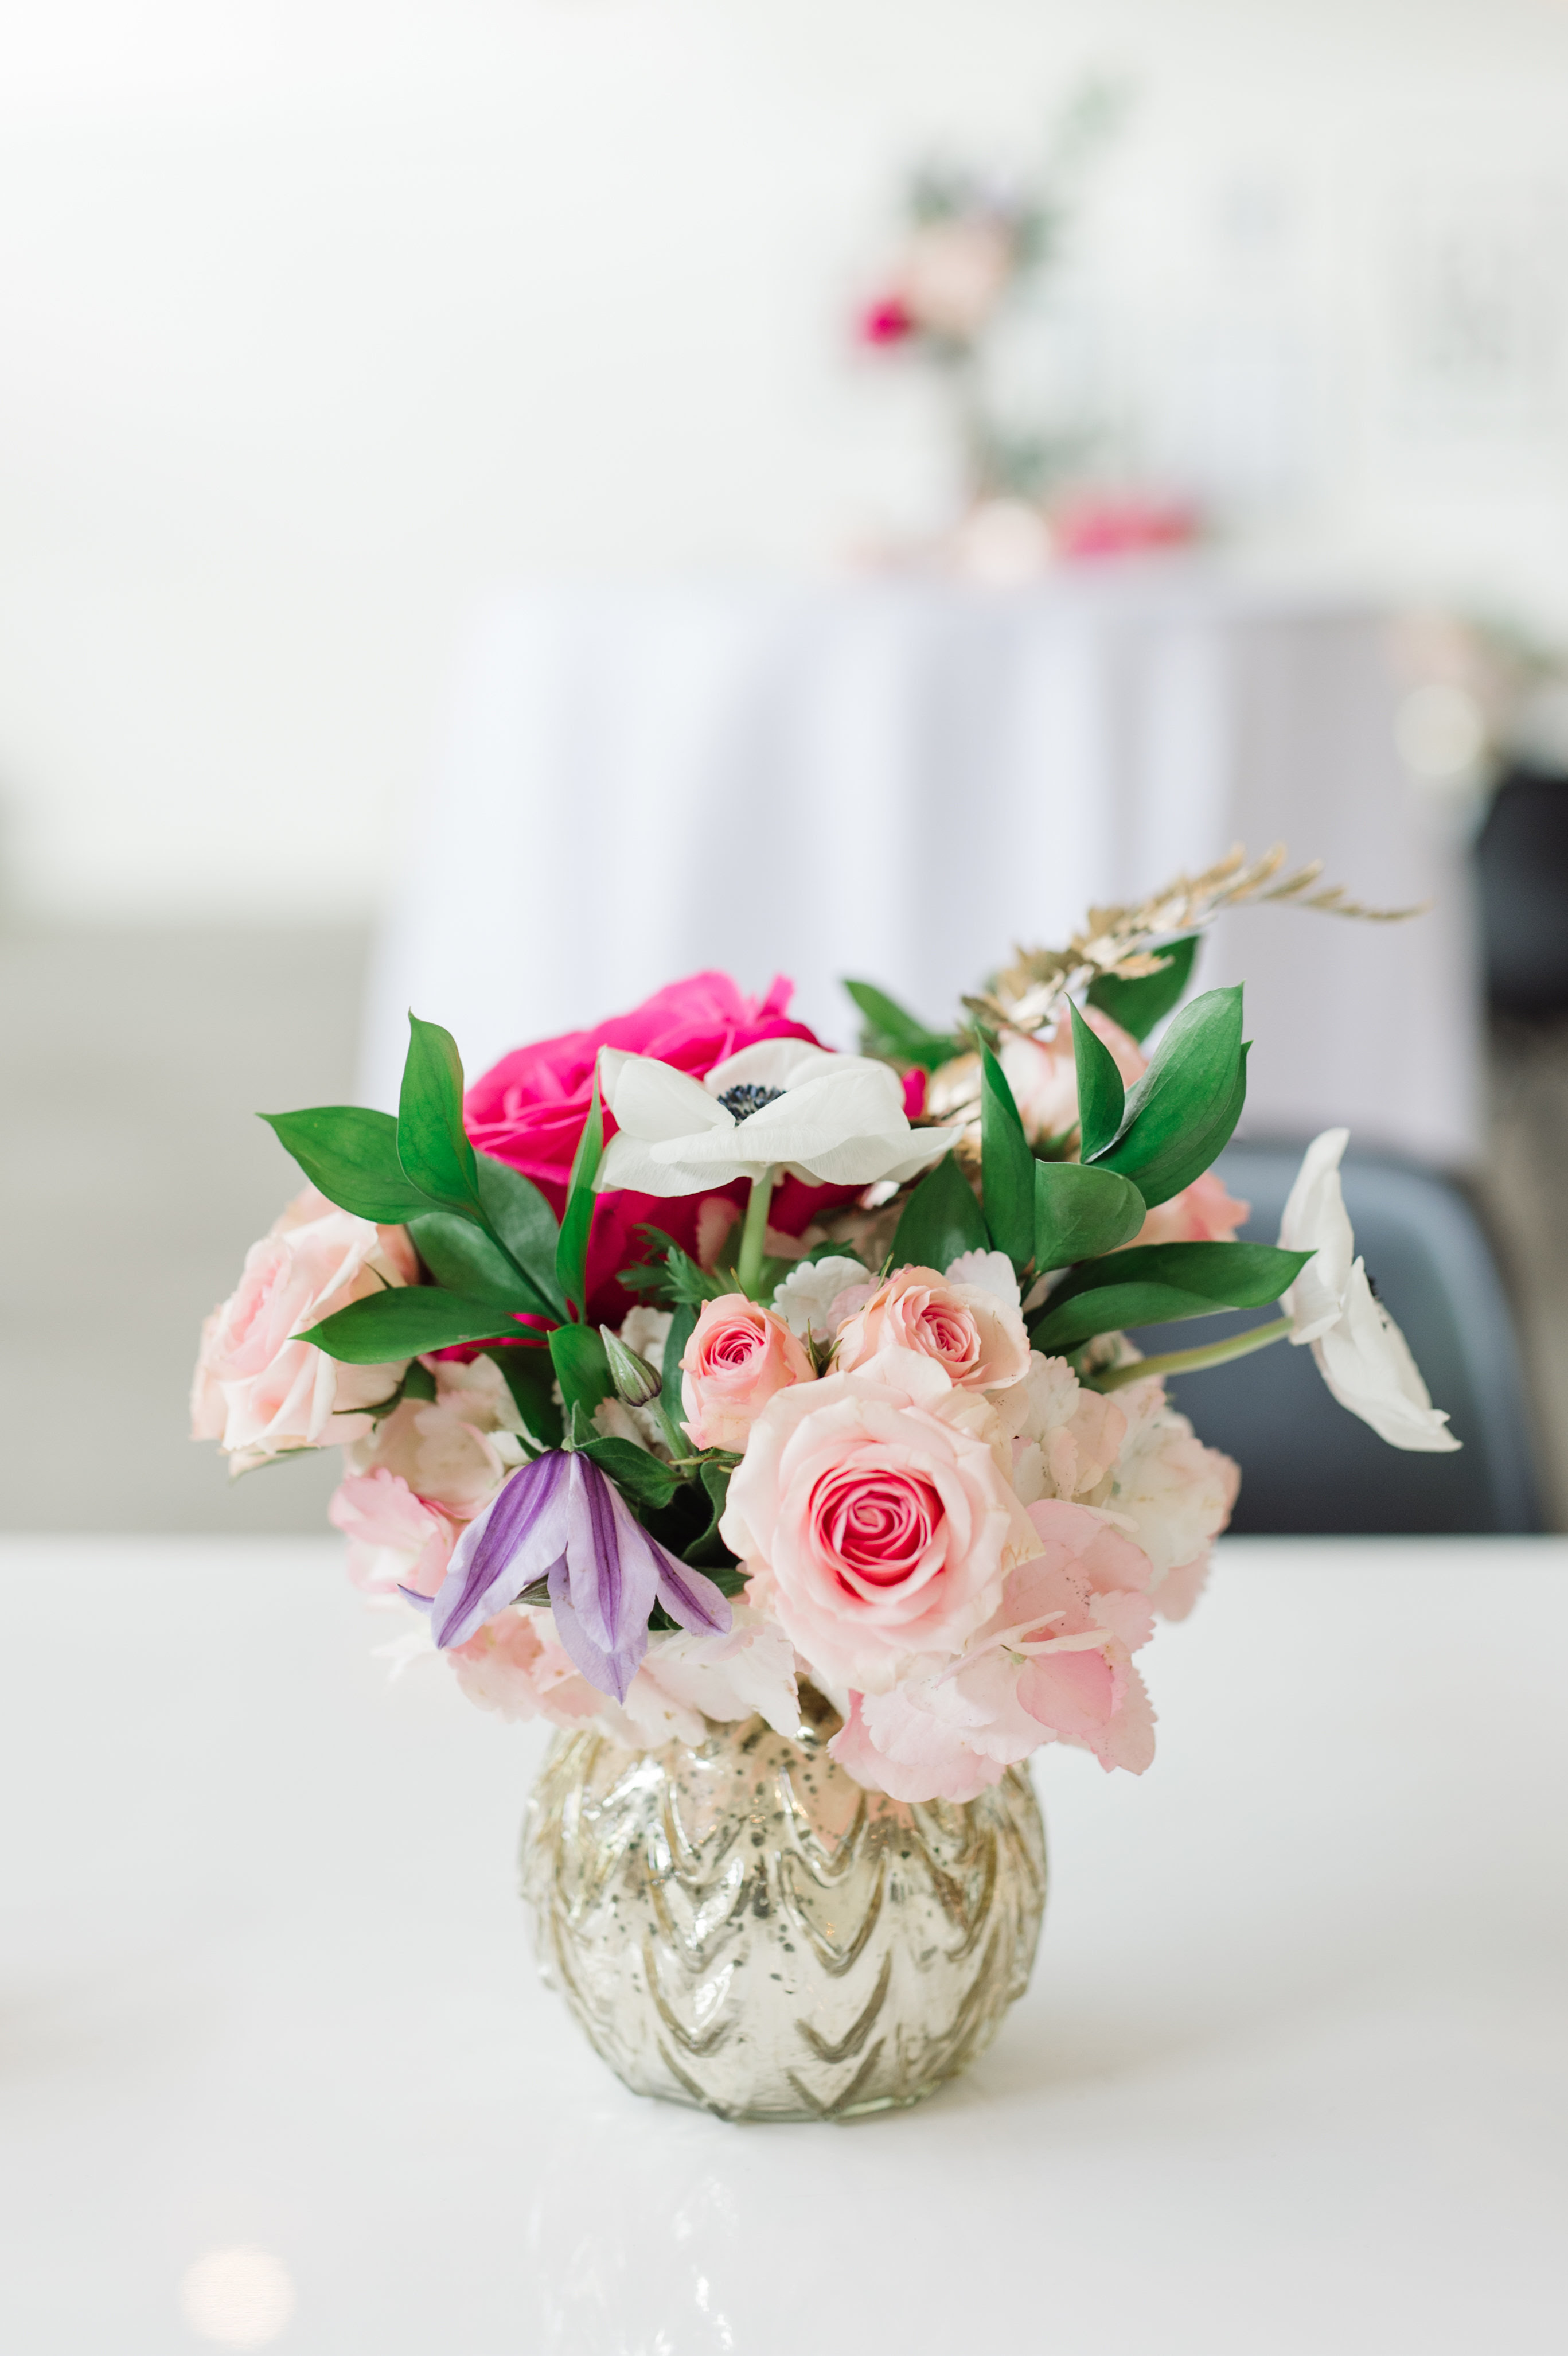 Floral Design - Weddings and Events - A Stylish Soiree - Dallas